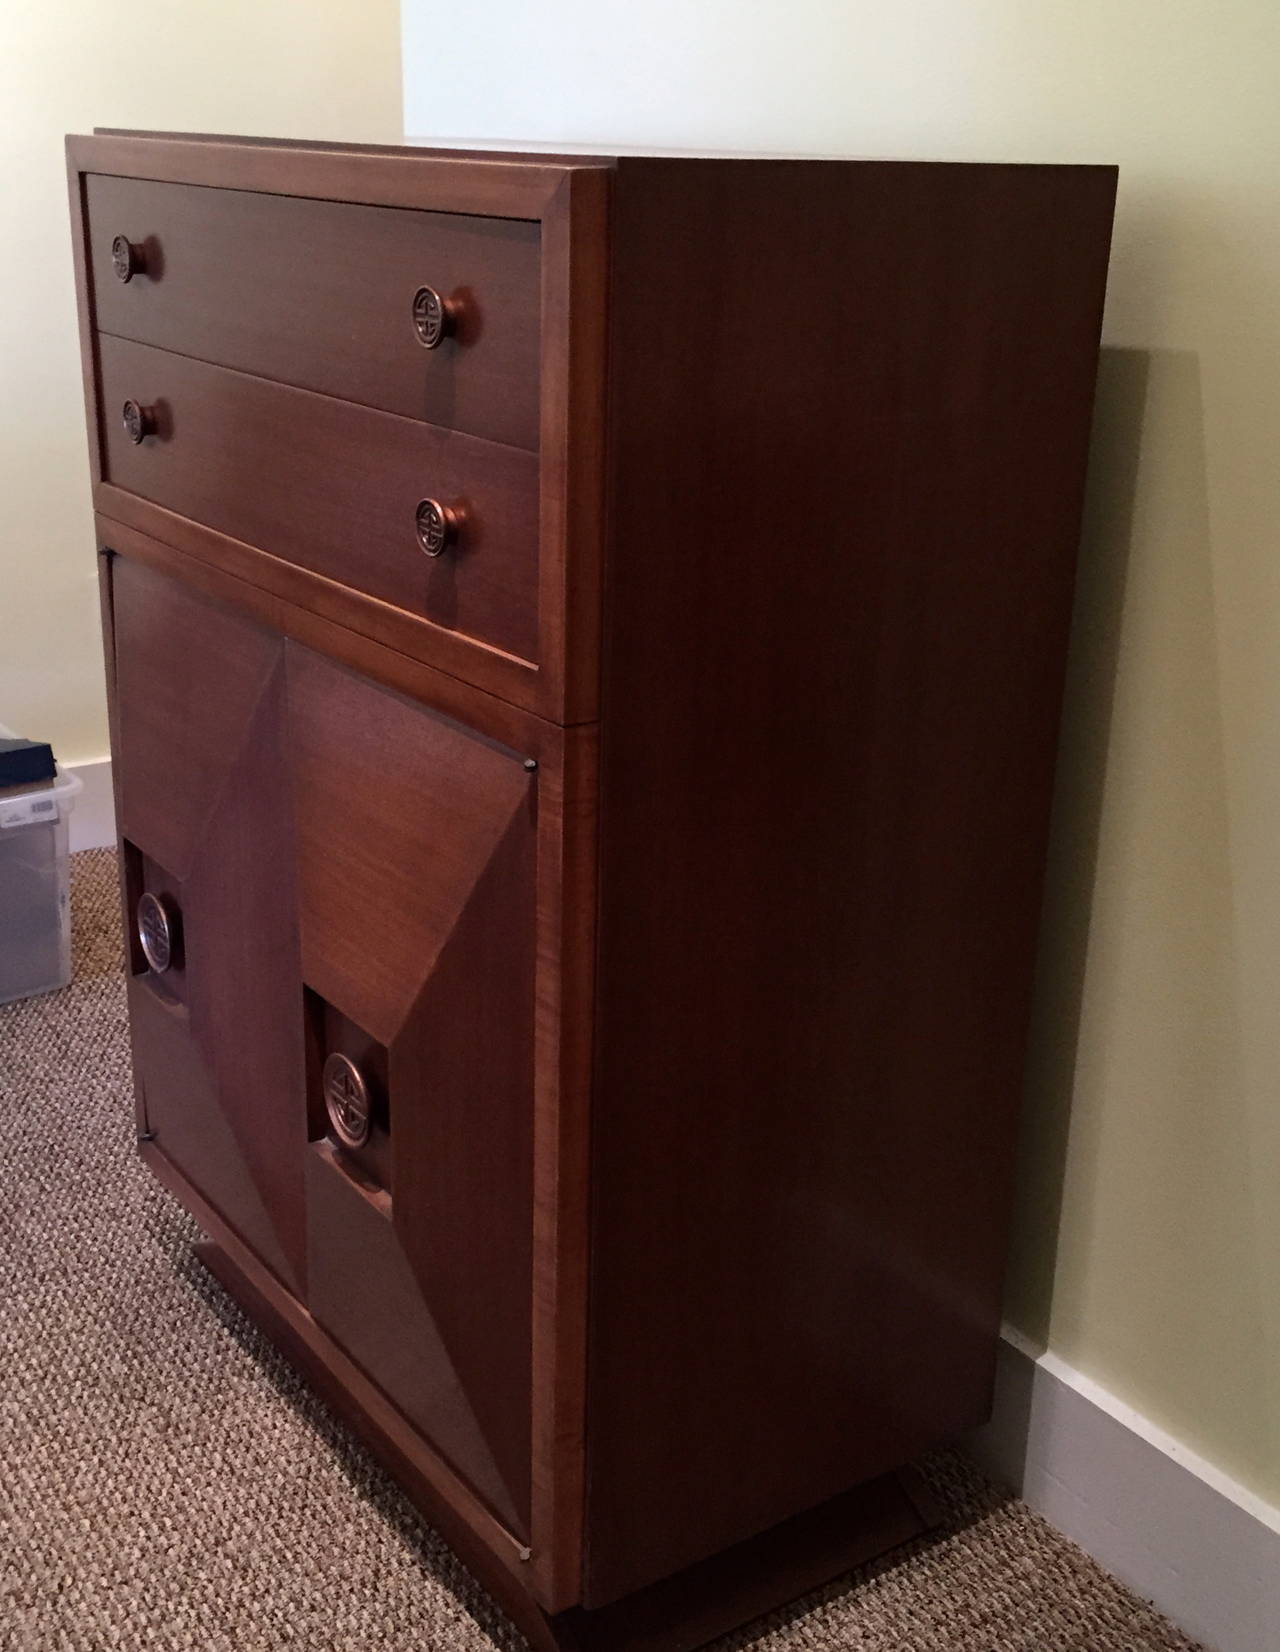 This mahogany tall chest of drawers is in the style of the great James Mont.  It has two drawers above two geometric form doors, and three drawers within the lower doors.  The hardware is Asian in design, also typical of Mont's style.

The base is